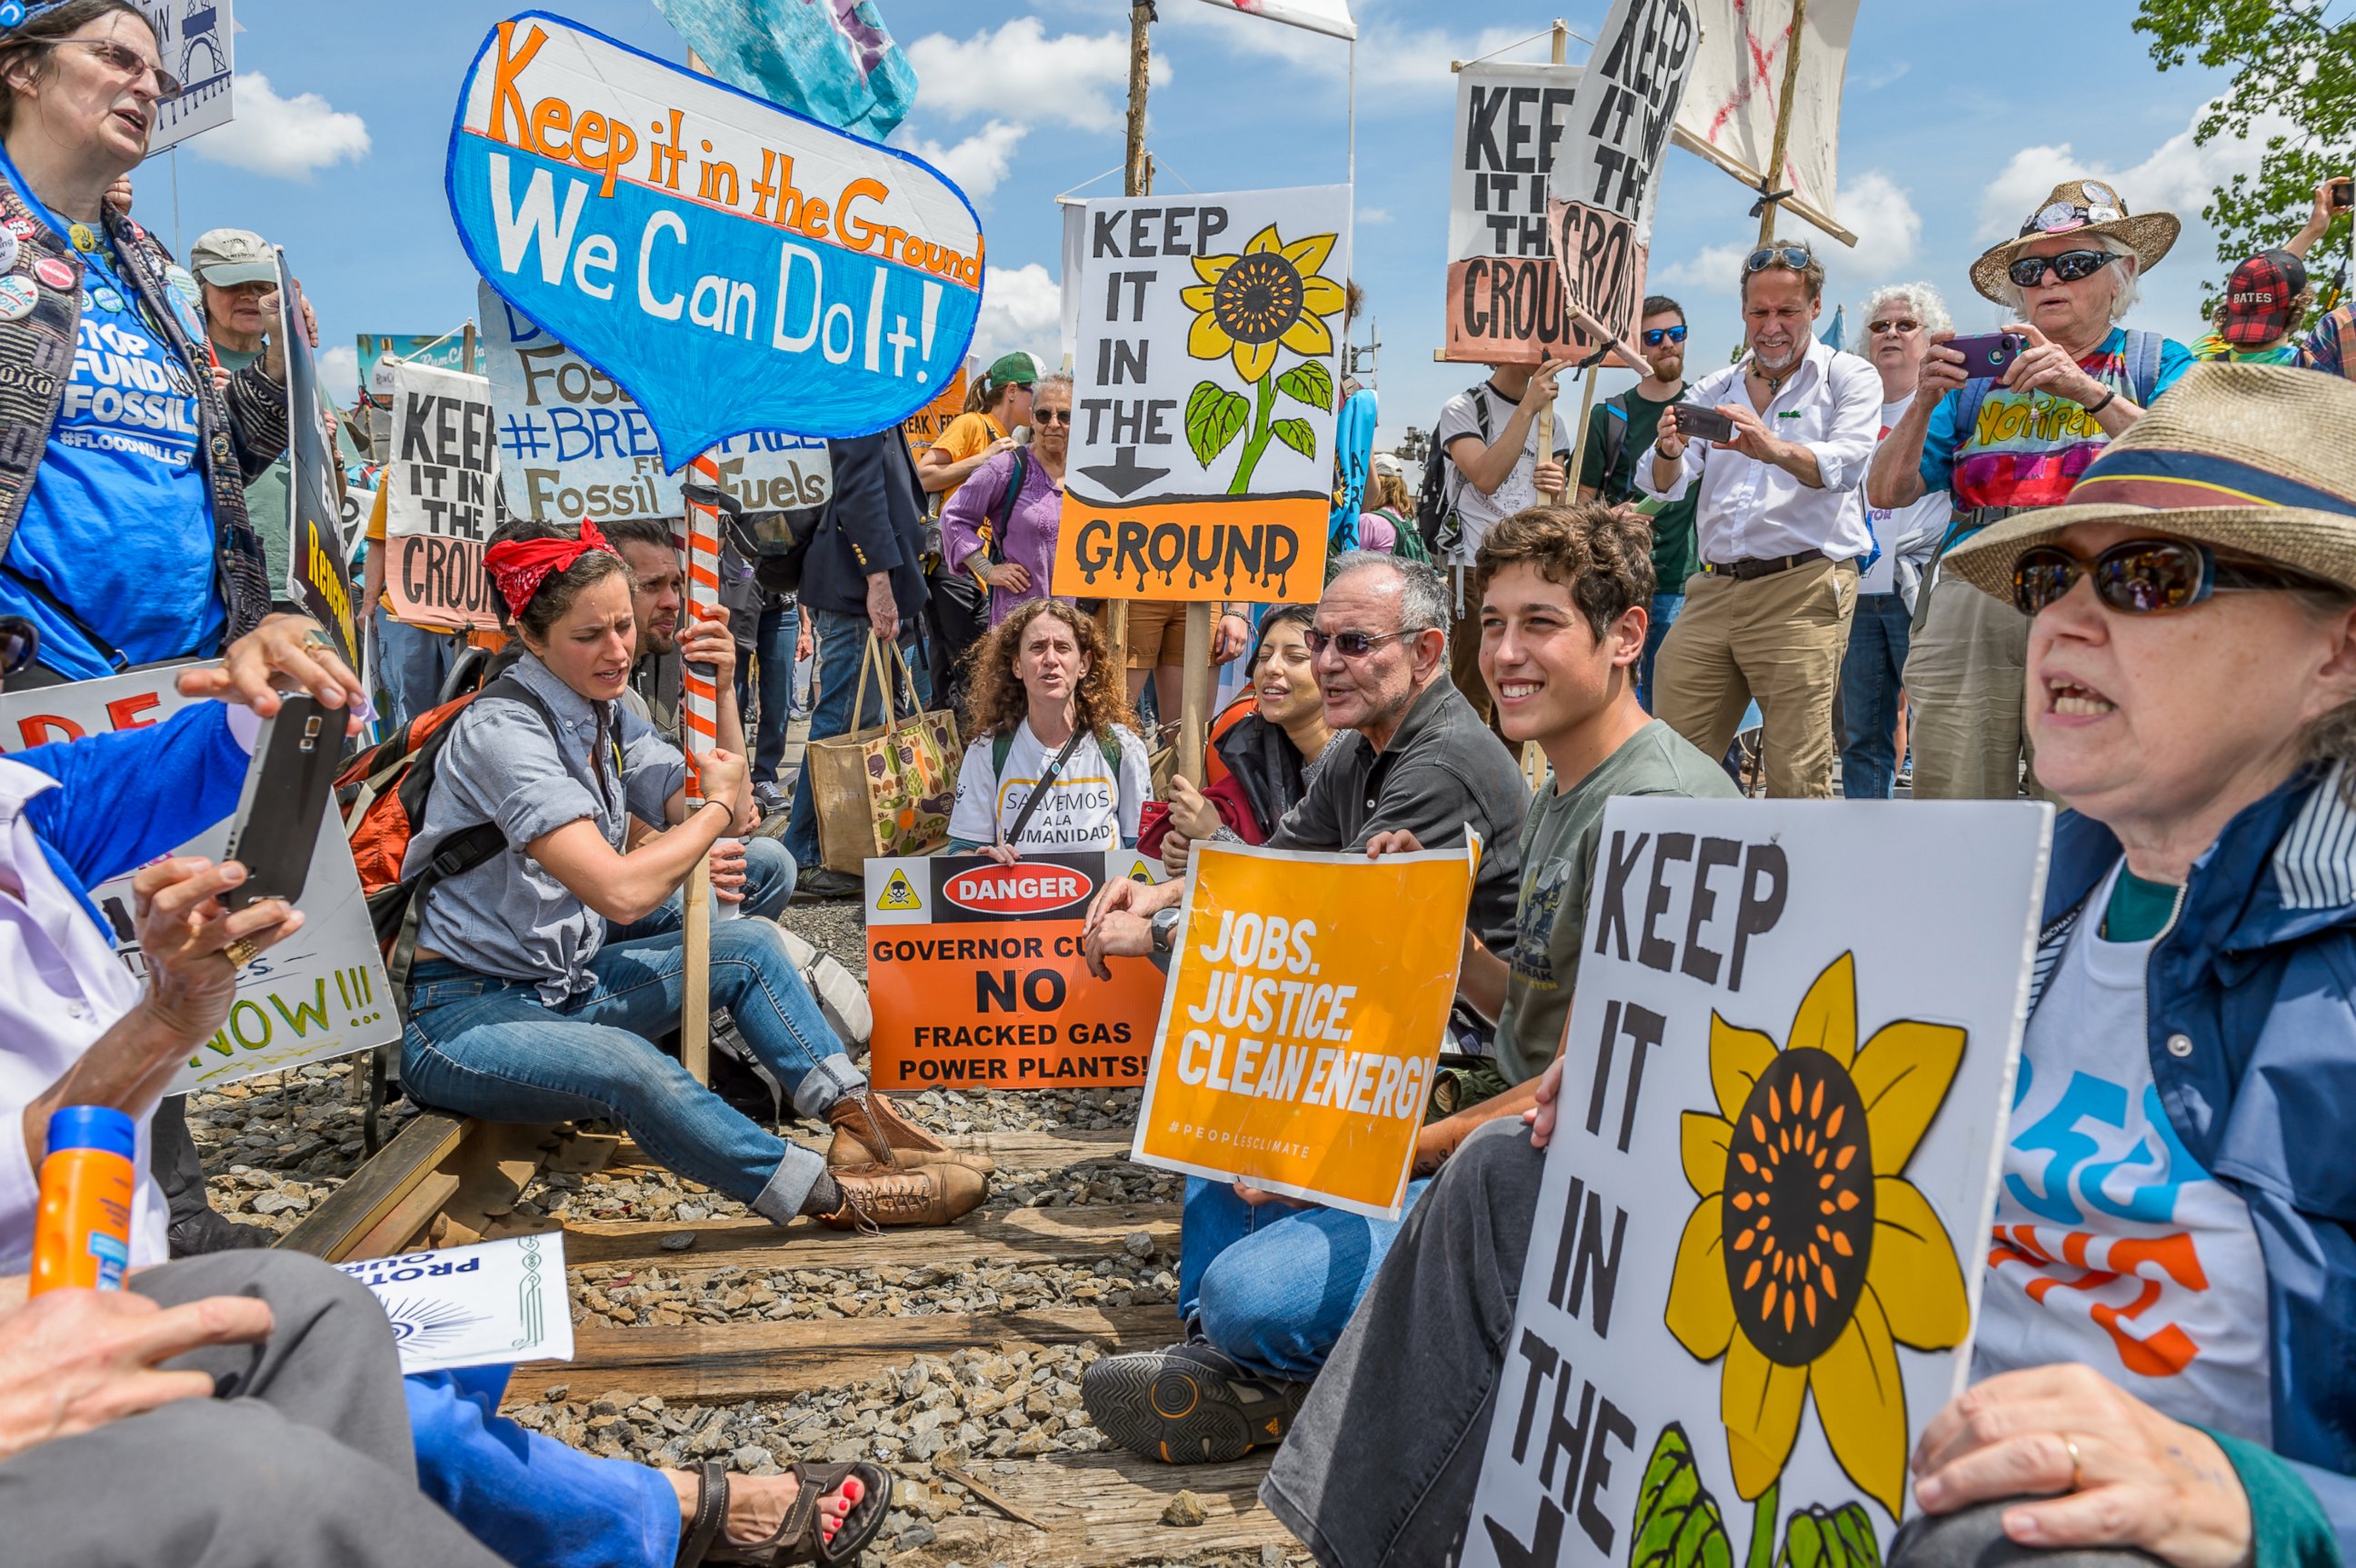 PHOTO: A rally, march and mass civil disobedience to stop the explosive fracked oil trains in the Port of Albany was held May 14, 2016 by over 1,500 people, from Albany and from as far as Maine, Quebec and central Pennsylvania.